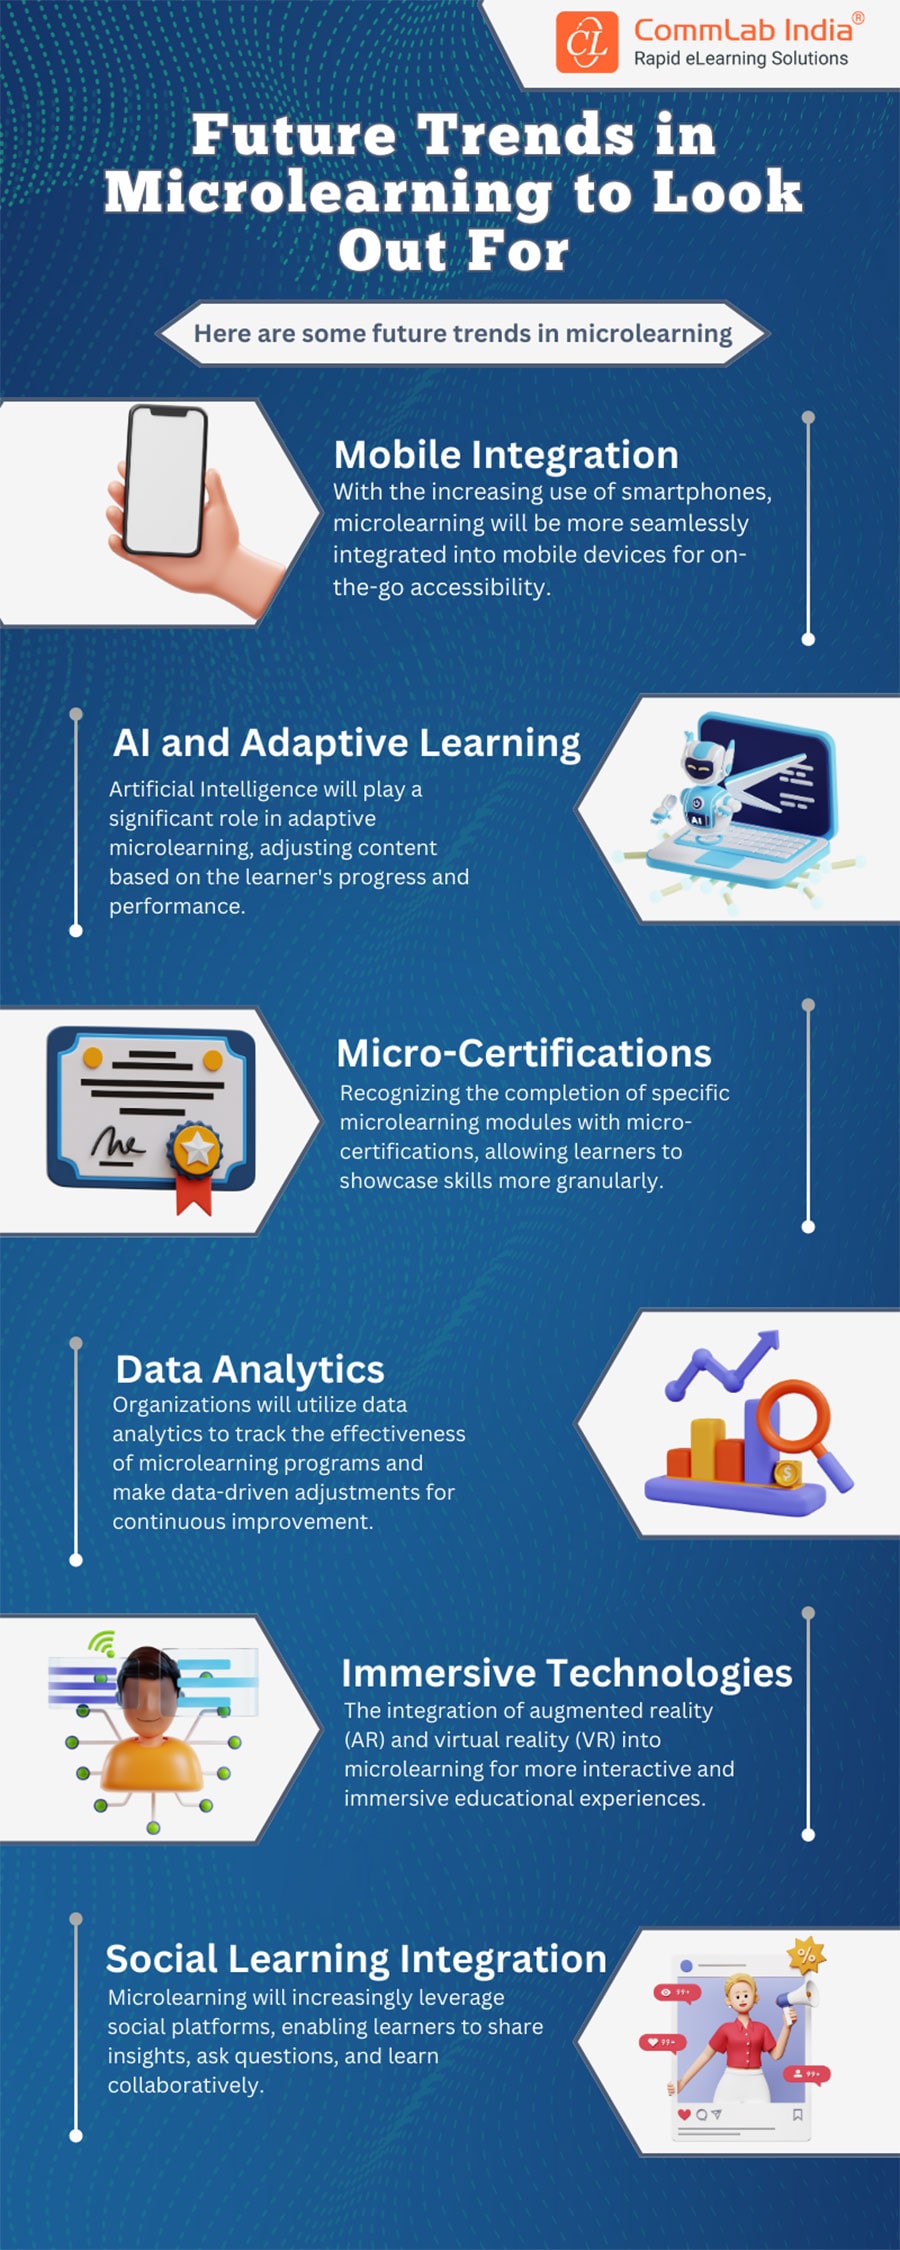 Future Microlearning Trends to Look Out For